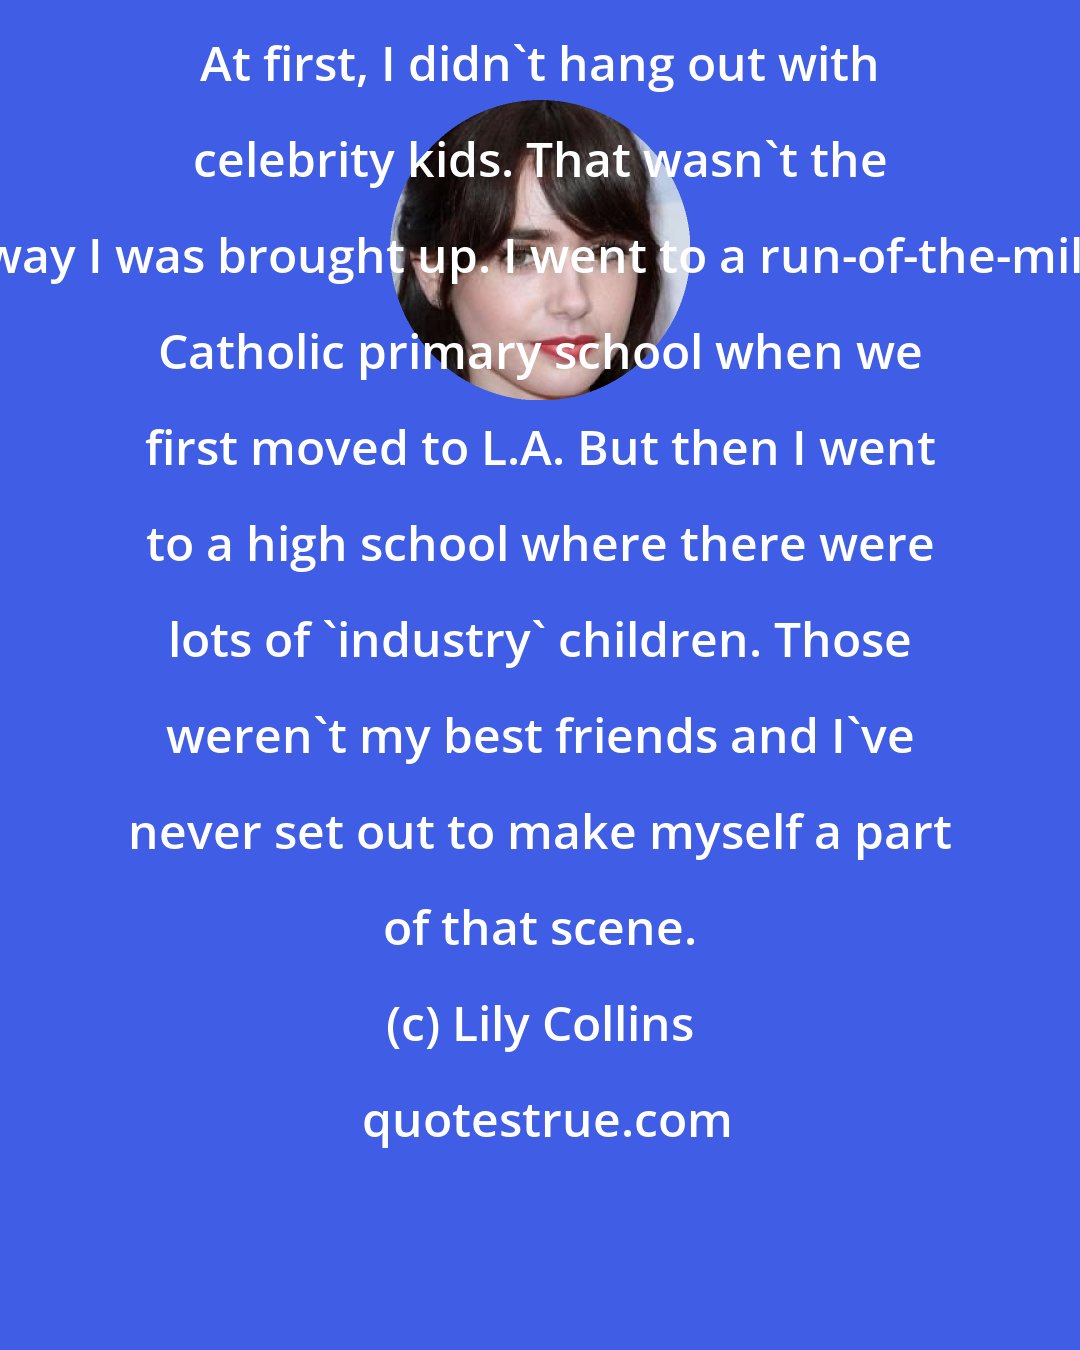 Lily Collins: At first, I didn't hang out with celebrity kids. That wasn't the way I was brought up. I went to a run-of-the-mill Catholic primary school when we first moved to L.A. But then I went to a high school where there were lots of 'industry' children. Those weren't my best friends and I've never set out to make myself a part of that scene.